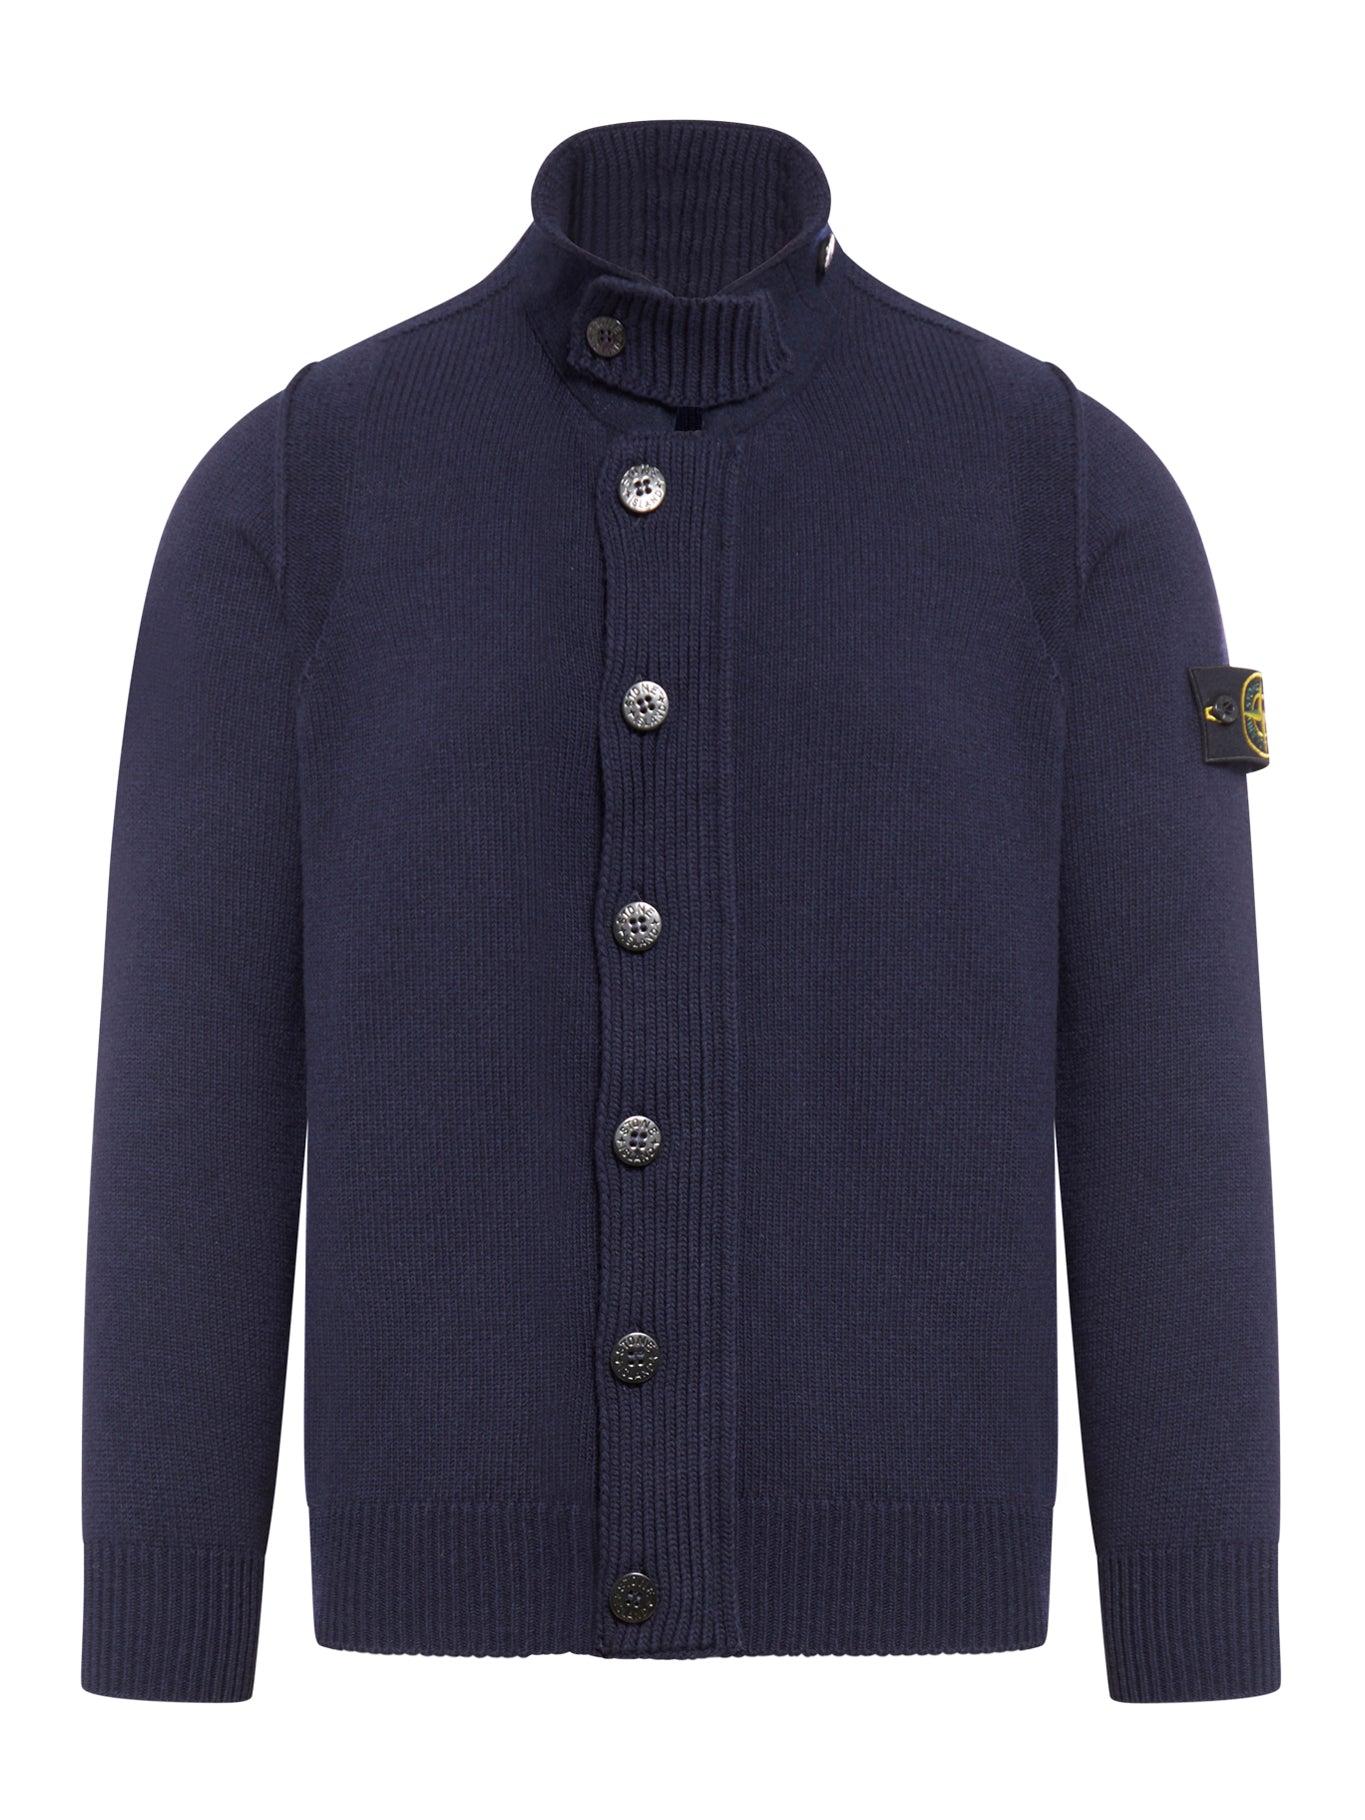 Stone Island Sweater in Blue for Men | Lyst